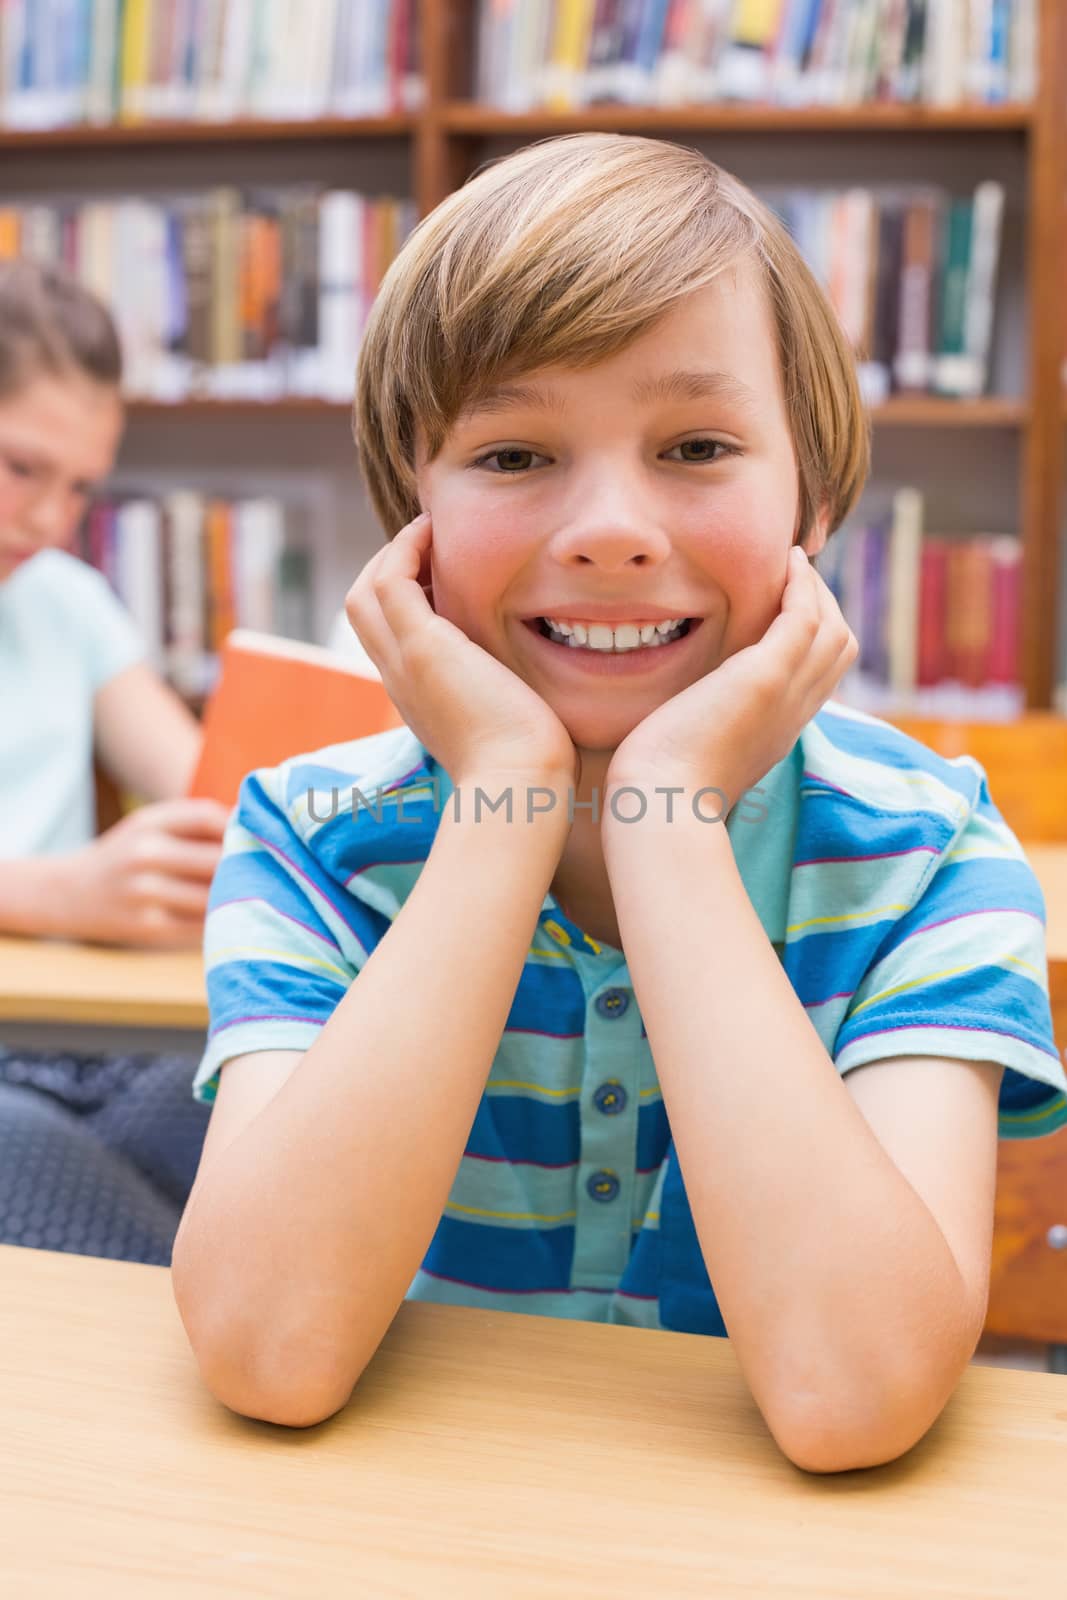 Cute pupil smiling at camera in library by Wavebreakmedia